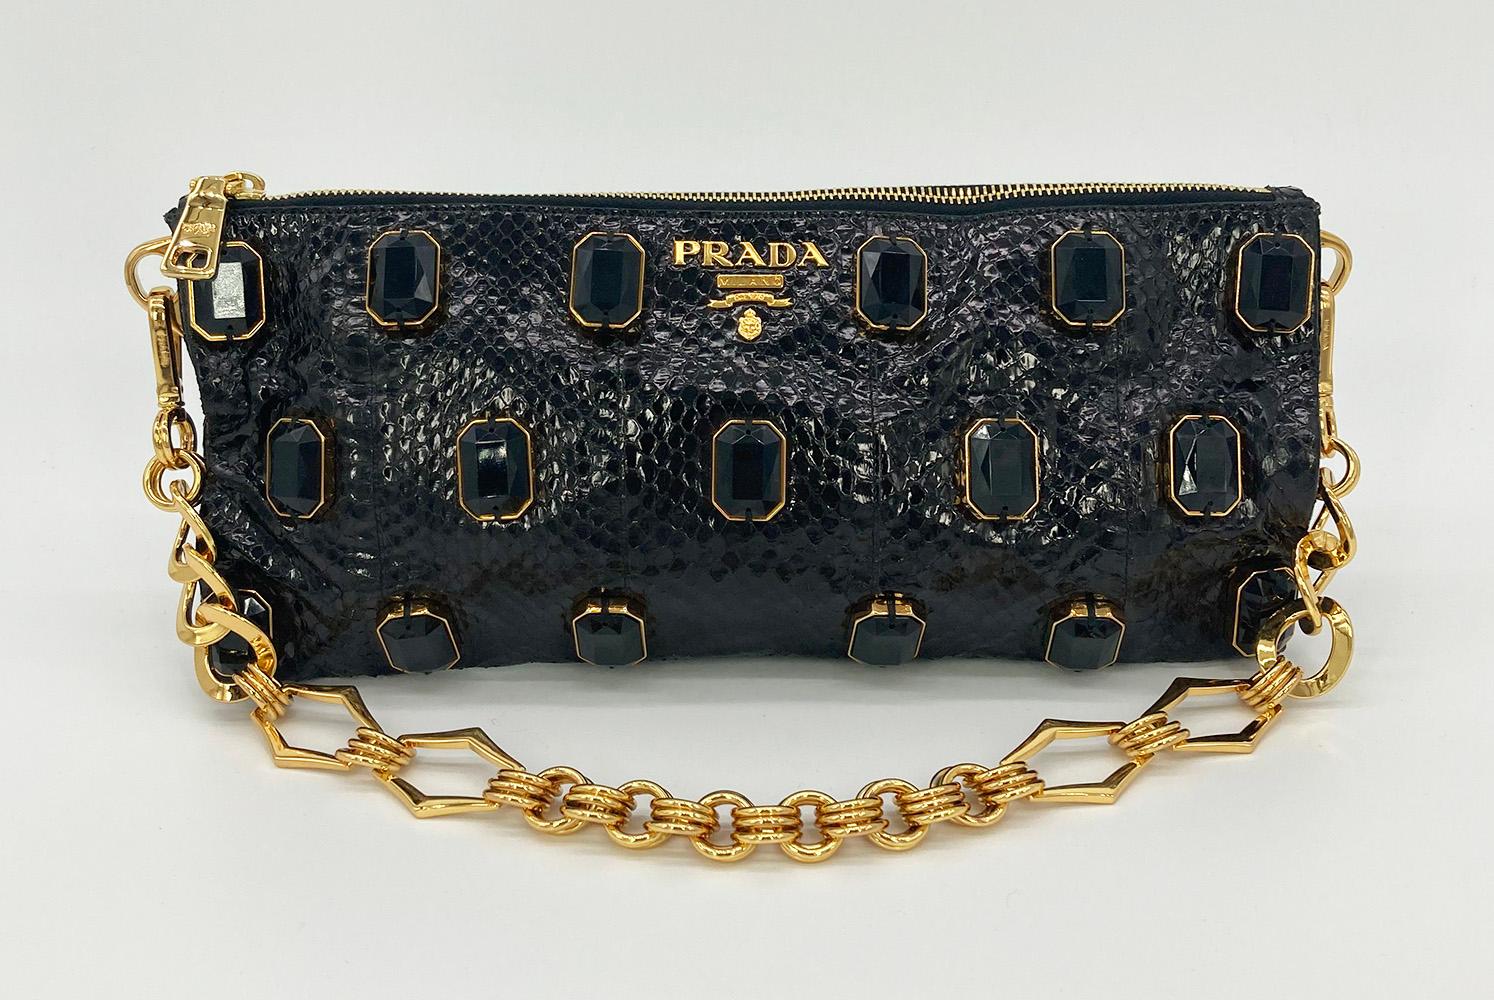 Prada Black Python Whips Pietre Clutch in excellent condition. Black python snakeskin exterior trimmed with gold hardware and large black crystal embellishments along front side. Top zipper closure opens to a black leather interior with one side